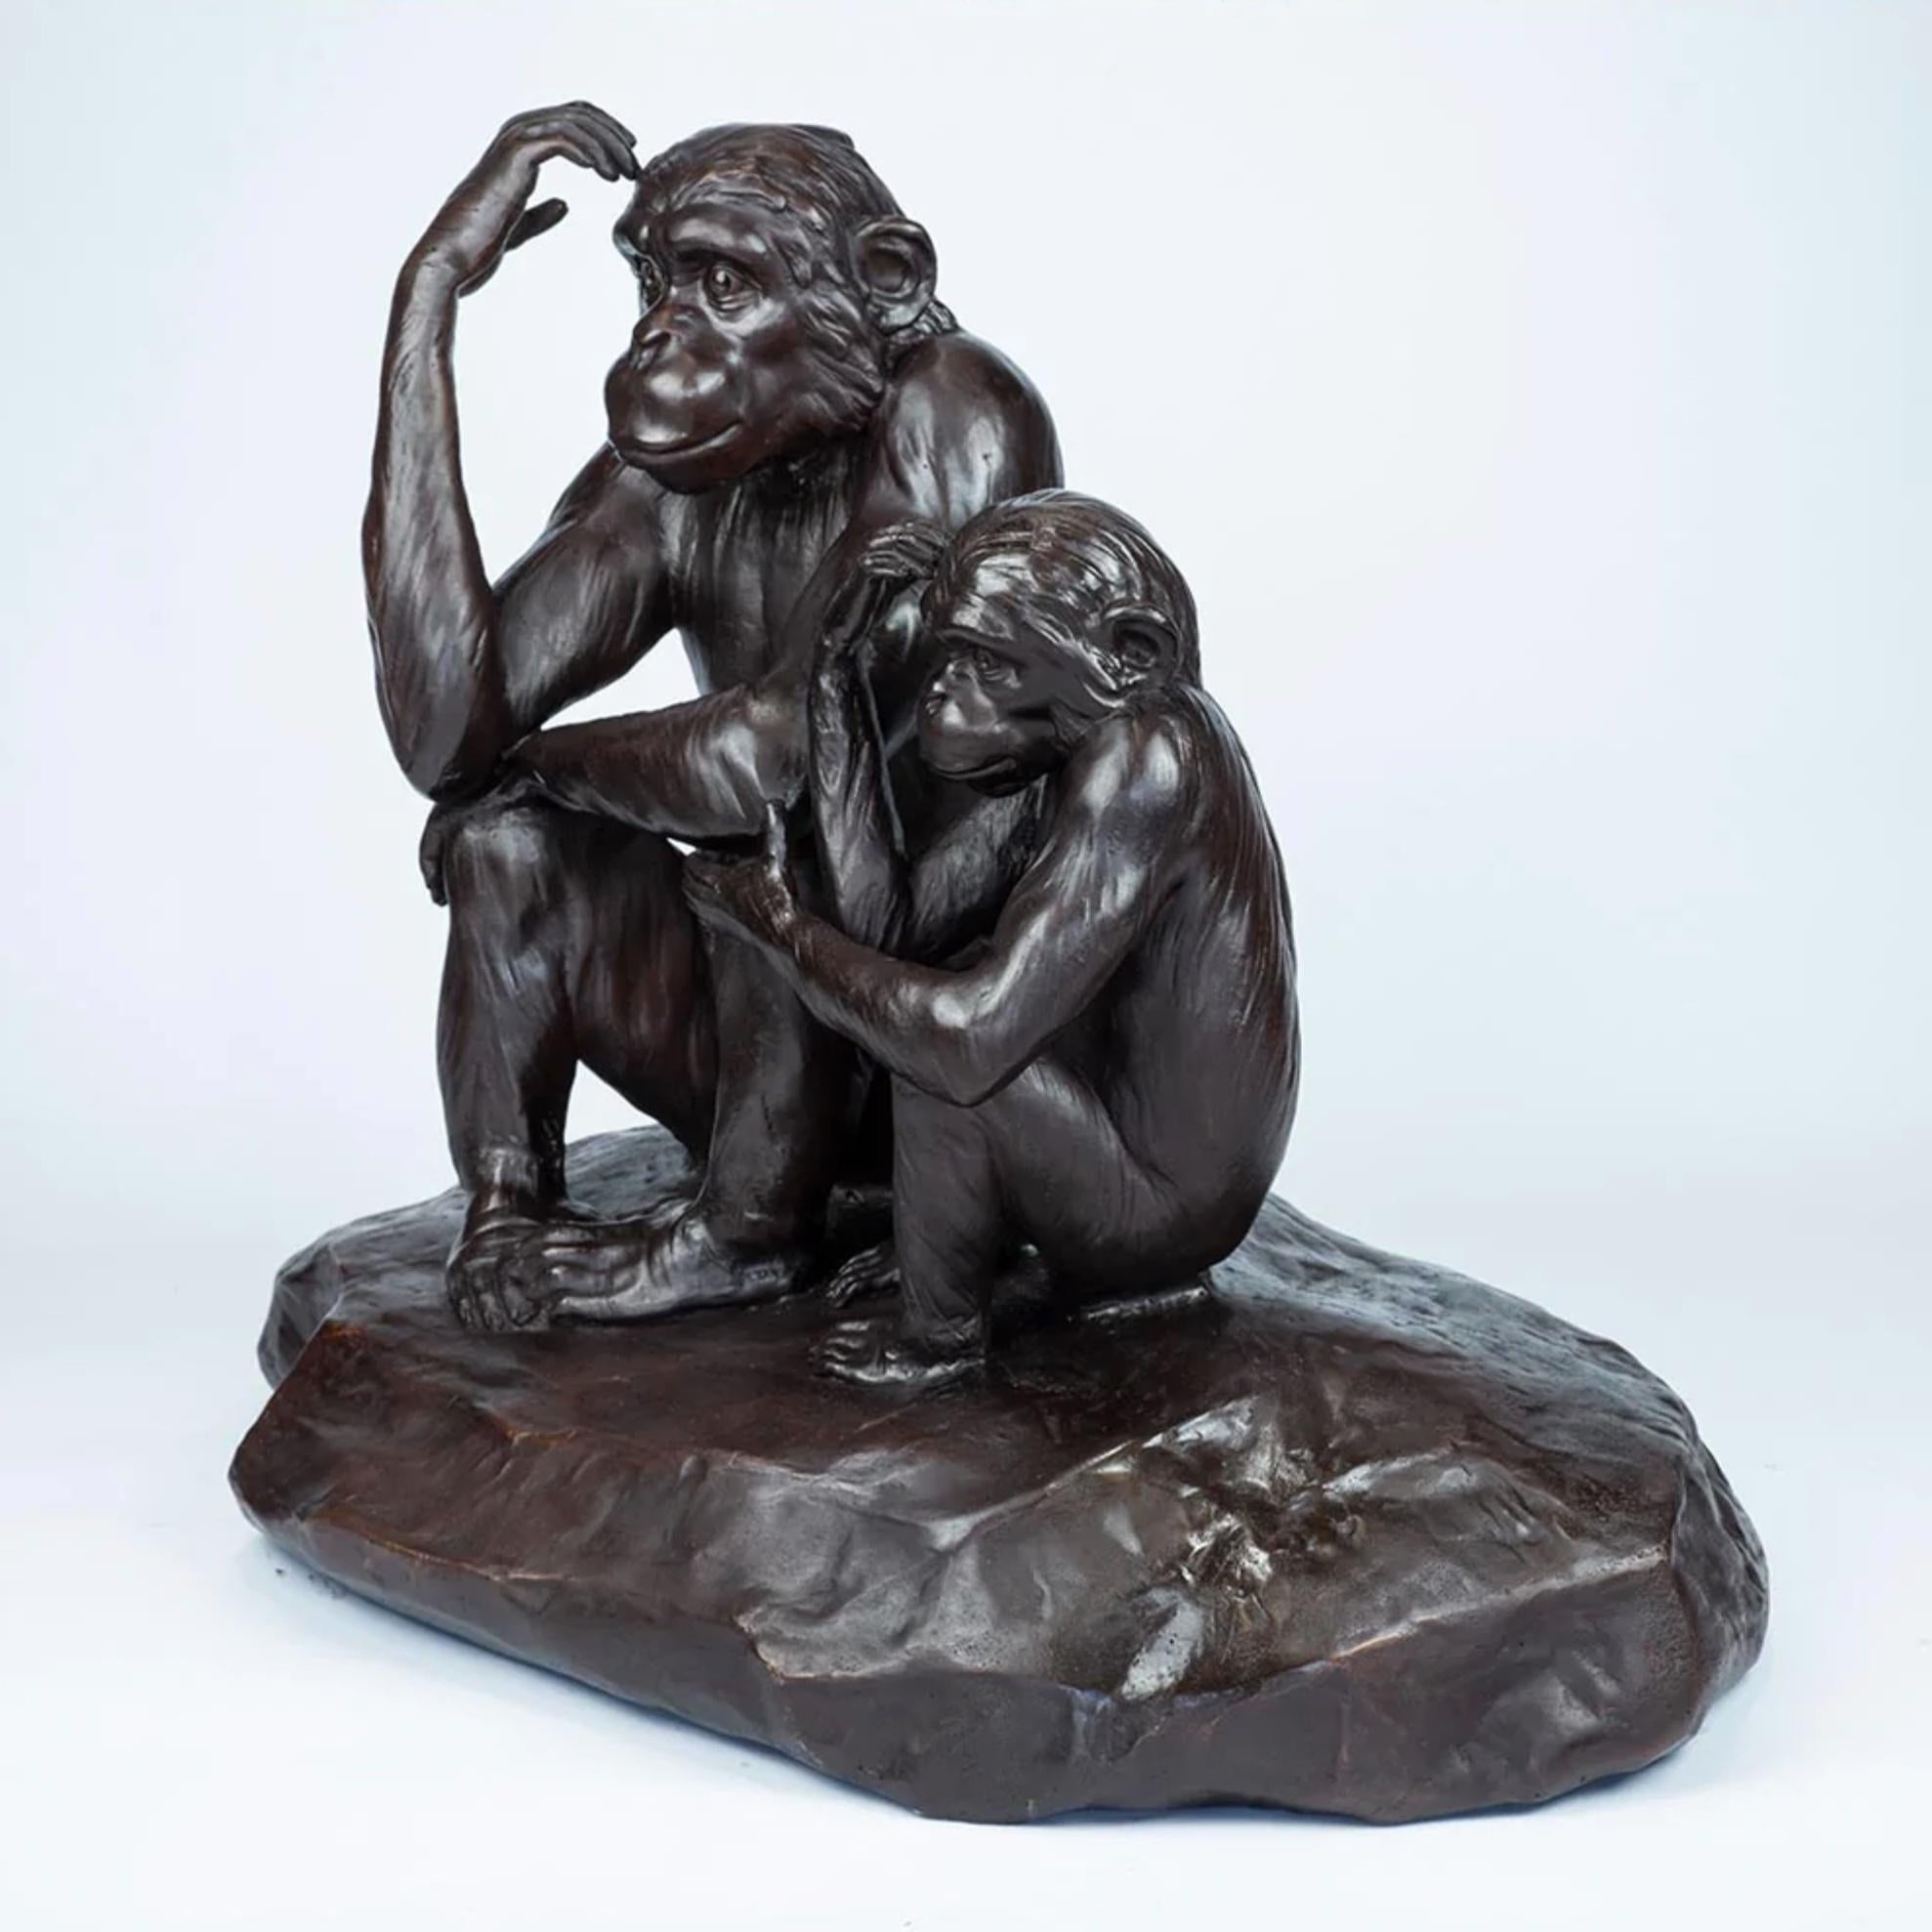 Authentic Bronze Chimp Imitation Medium Sculpture by Gillie and Marc  - Contemporary Art by Gillie and Marc Schattner